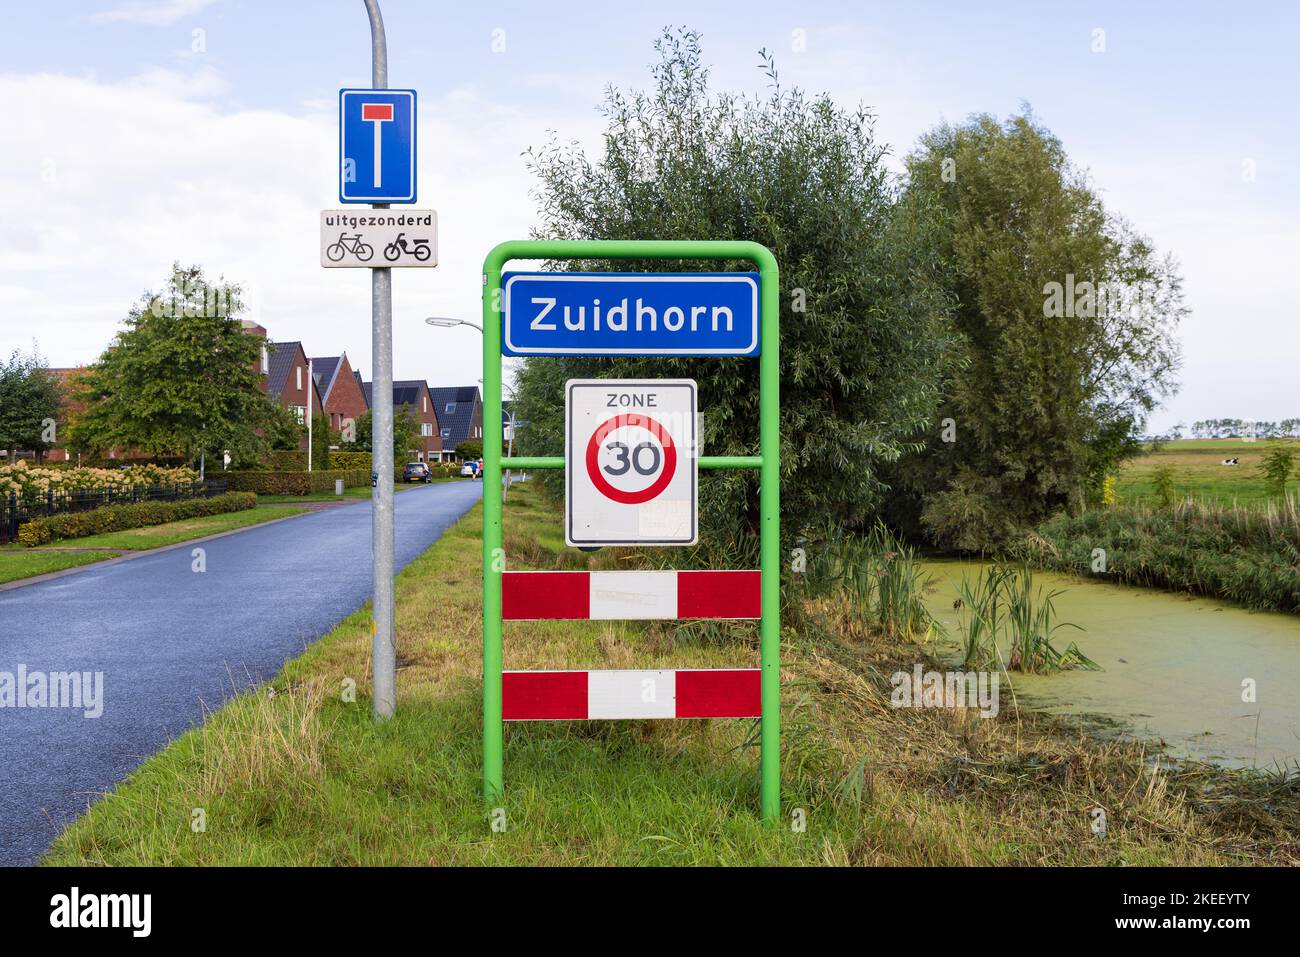 Zuidhorn, The Netherlands - September 25, 2022: Place name sign Zuidhorn, municipality Westerkwartier Groningen province in the Netherlands Stock Photo